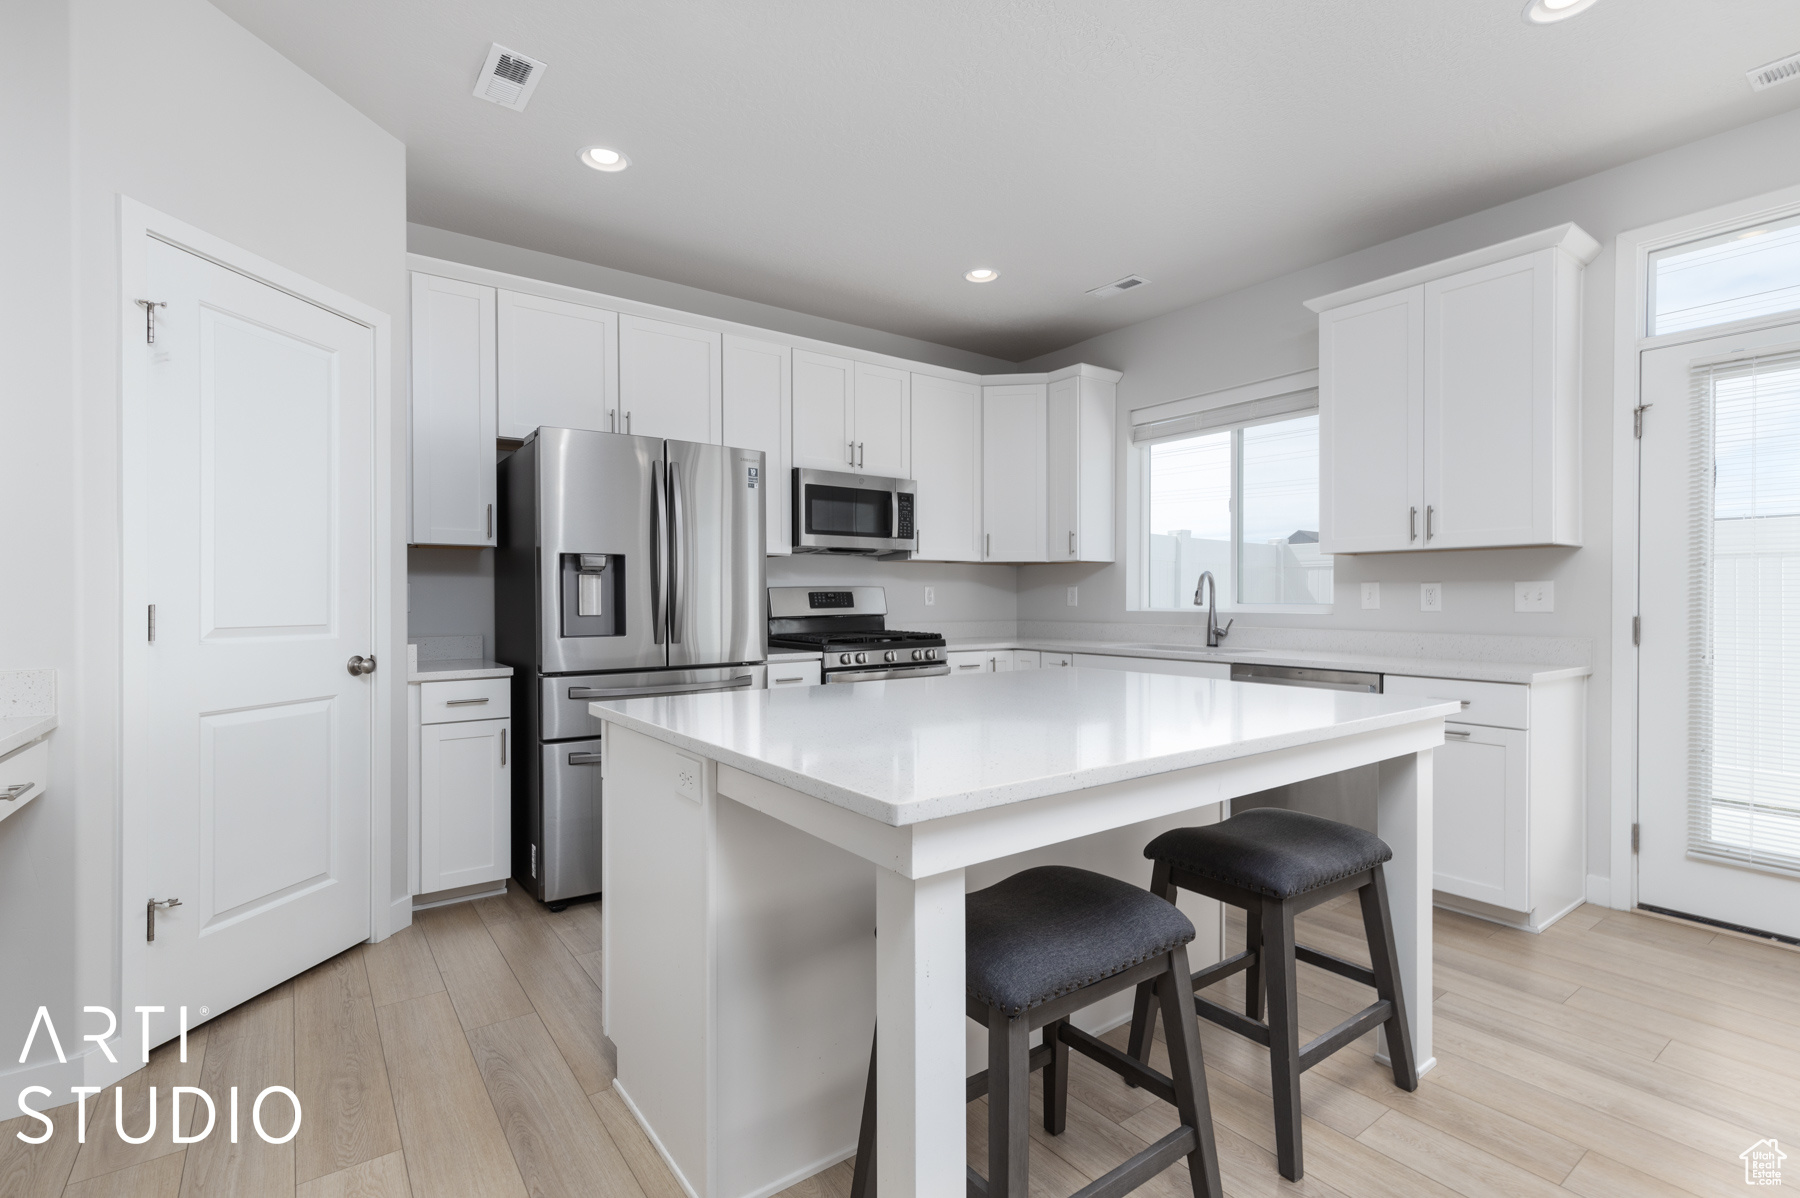 Kitchen featuring appliances with stainless steel finishes, white cabinetry, a kitchen island, and a healthy amount of sunlight